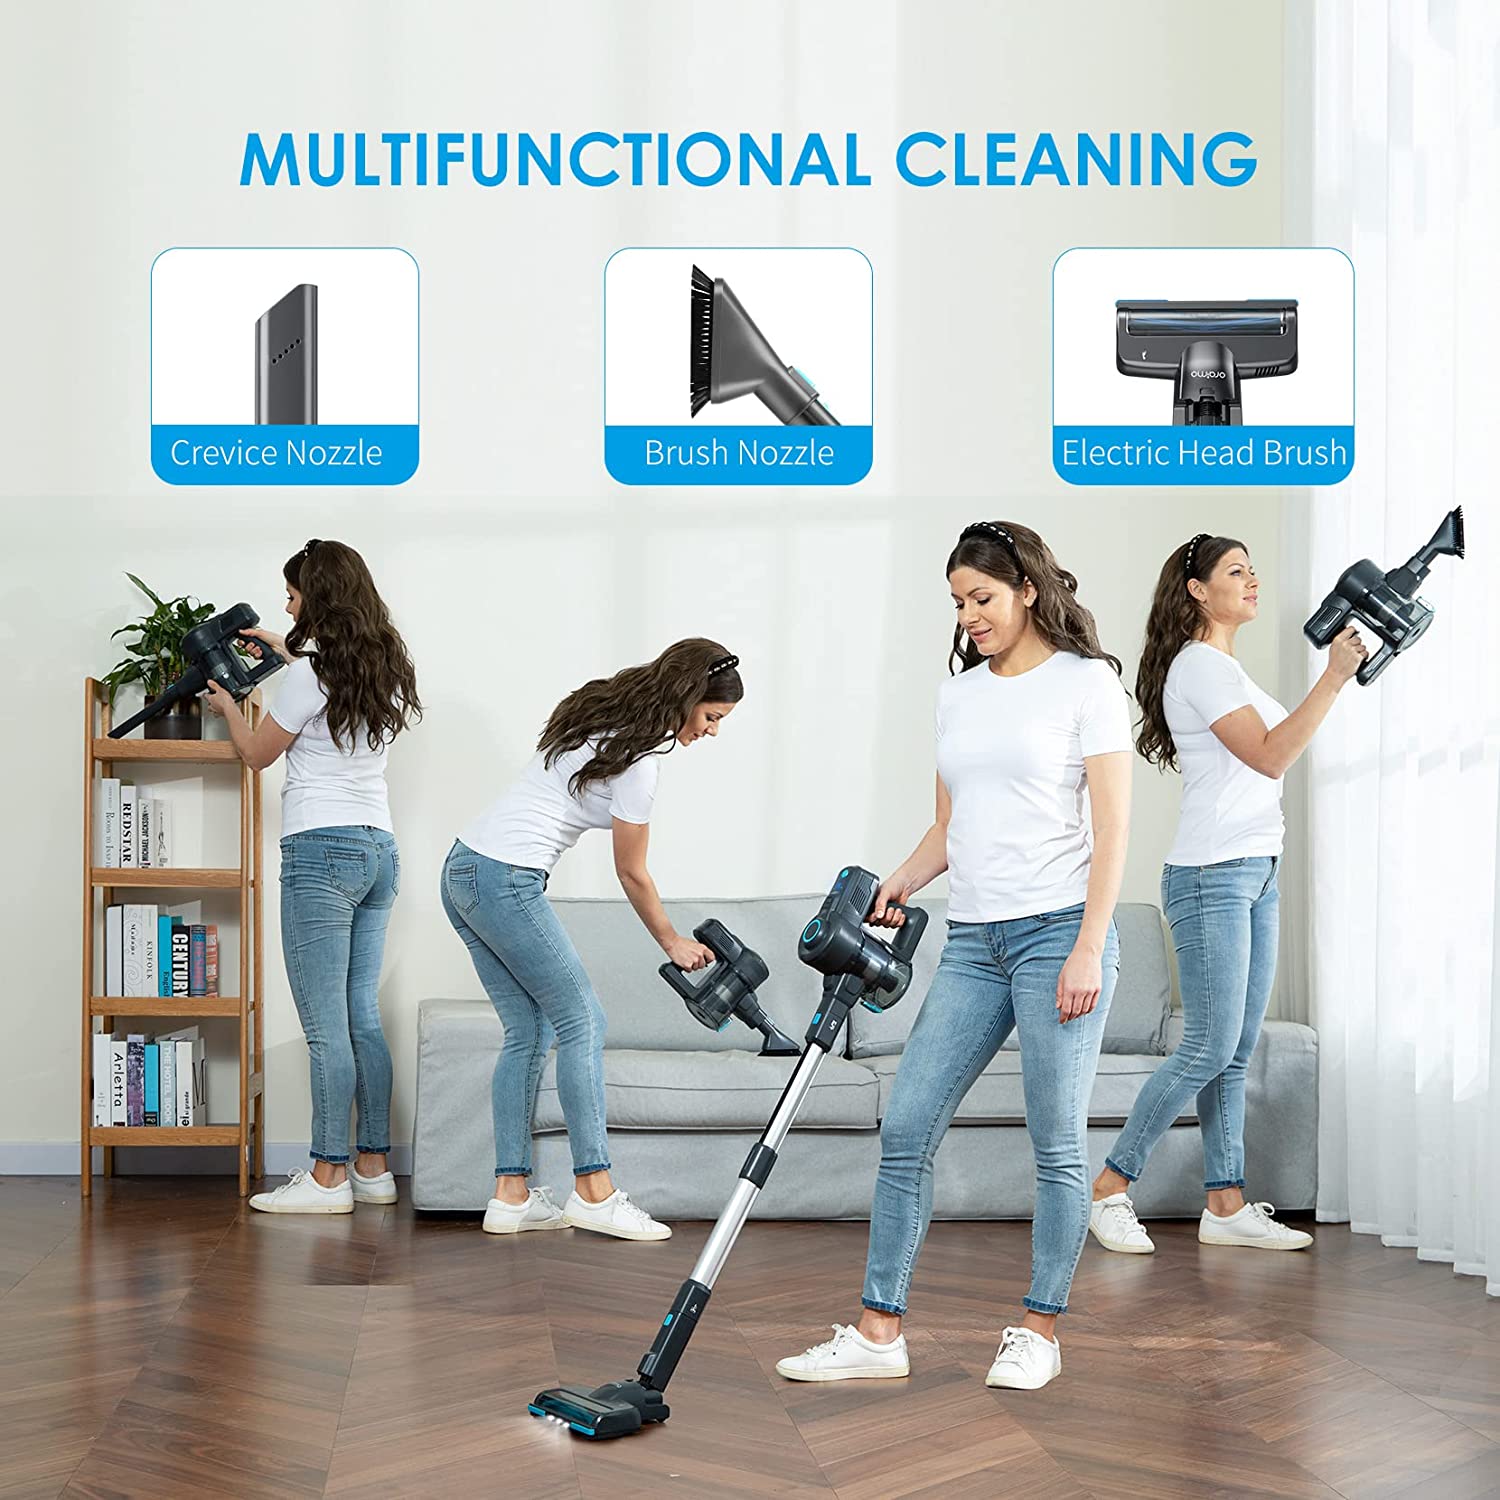  Oraimo Cordless Vacuum Cleaner, 6-in-1 Stick Vacuum with  2200mAh*6 Rechargeable Battery, Vacuum Cleaner for Home with Self-Standing,  Handheld Vacuum for Home Kitchen Hard Floor Carpet Pet Hair